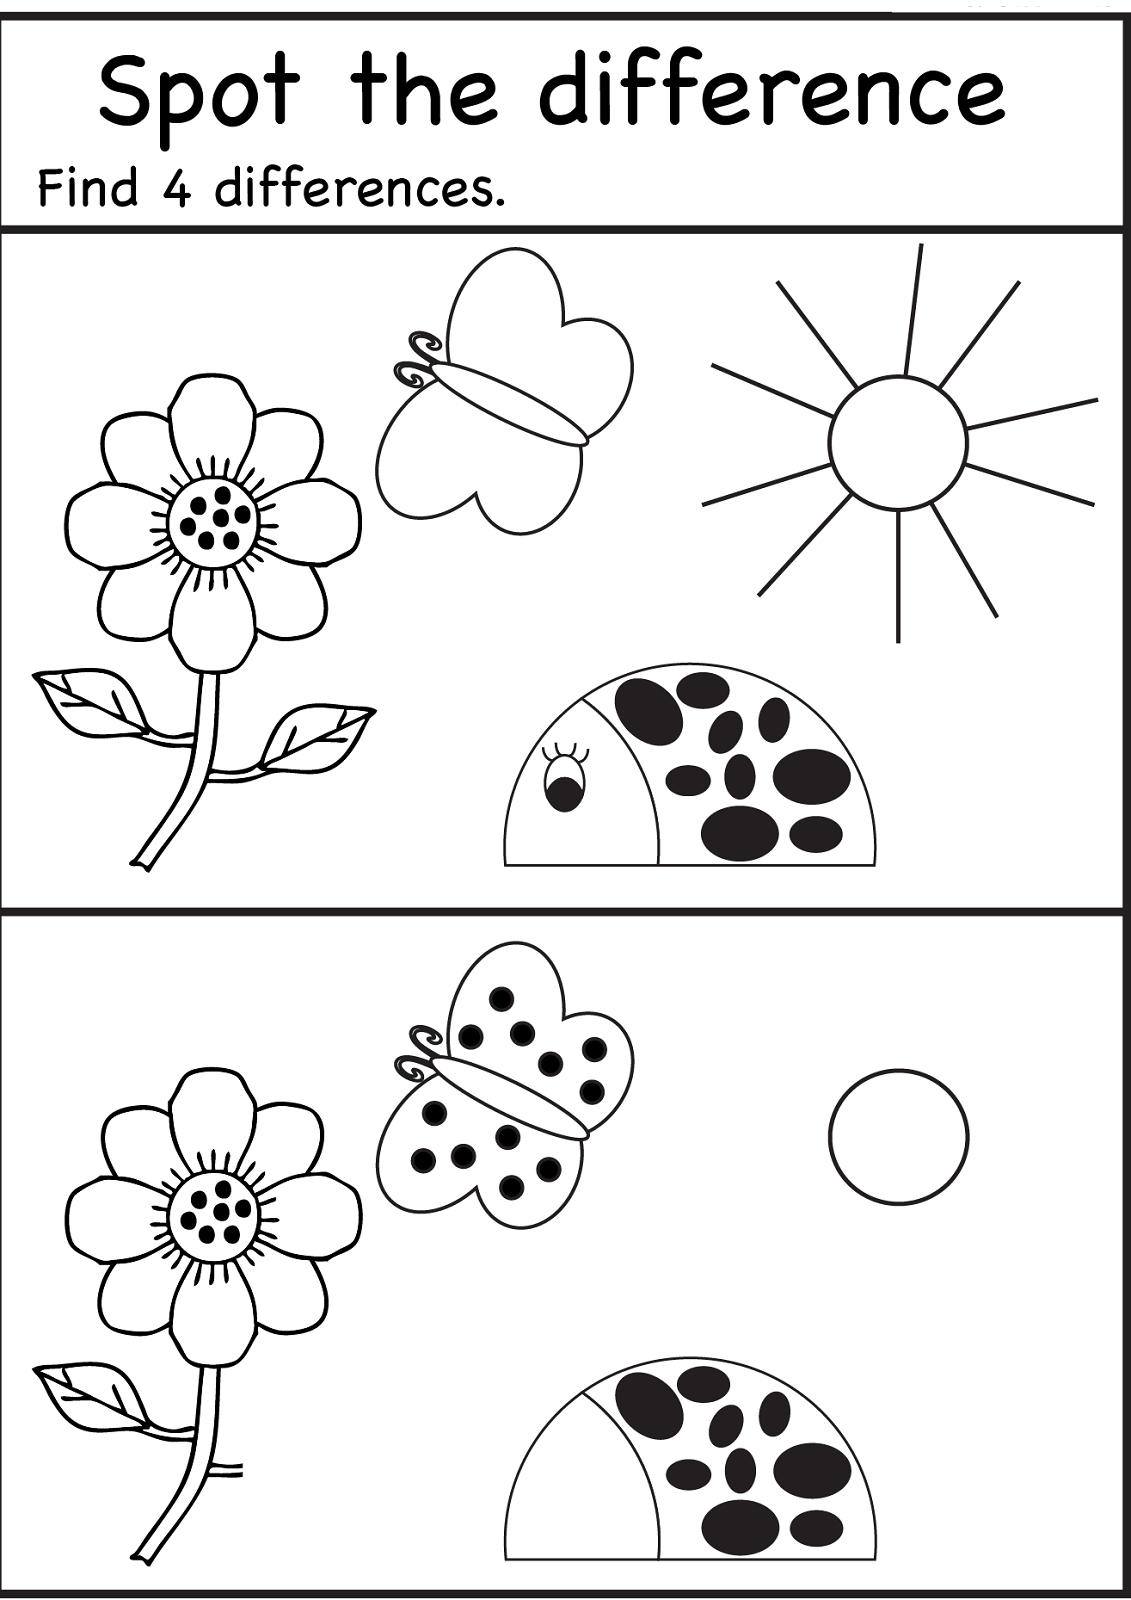 Spot The Difference Worksheets For Kids | Spot The . Games - Free Printable Spot The Difference For Kids